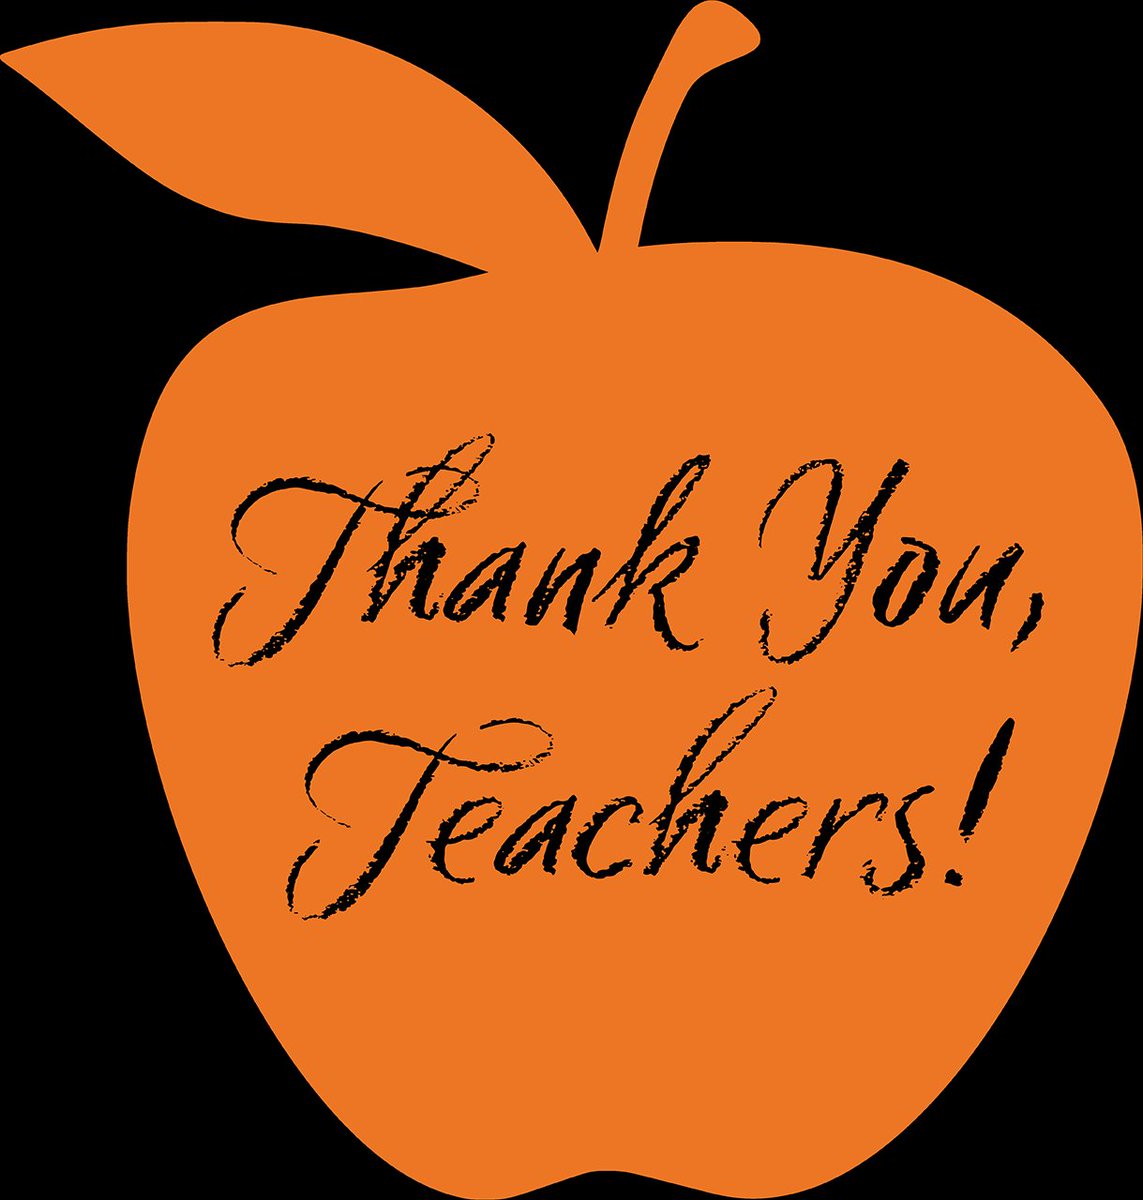 In honor of Teacher Appreciation Week, Rectory School would like to extend the deepest gratitude to our amazing faculty who make a difference in our students' lives each and every day. Thank you, teachers. We could not do it without you!

#rectoryschool #juniorboardingschool #ct